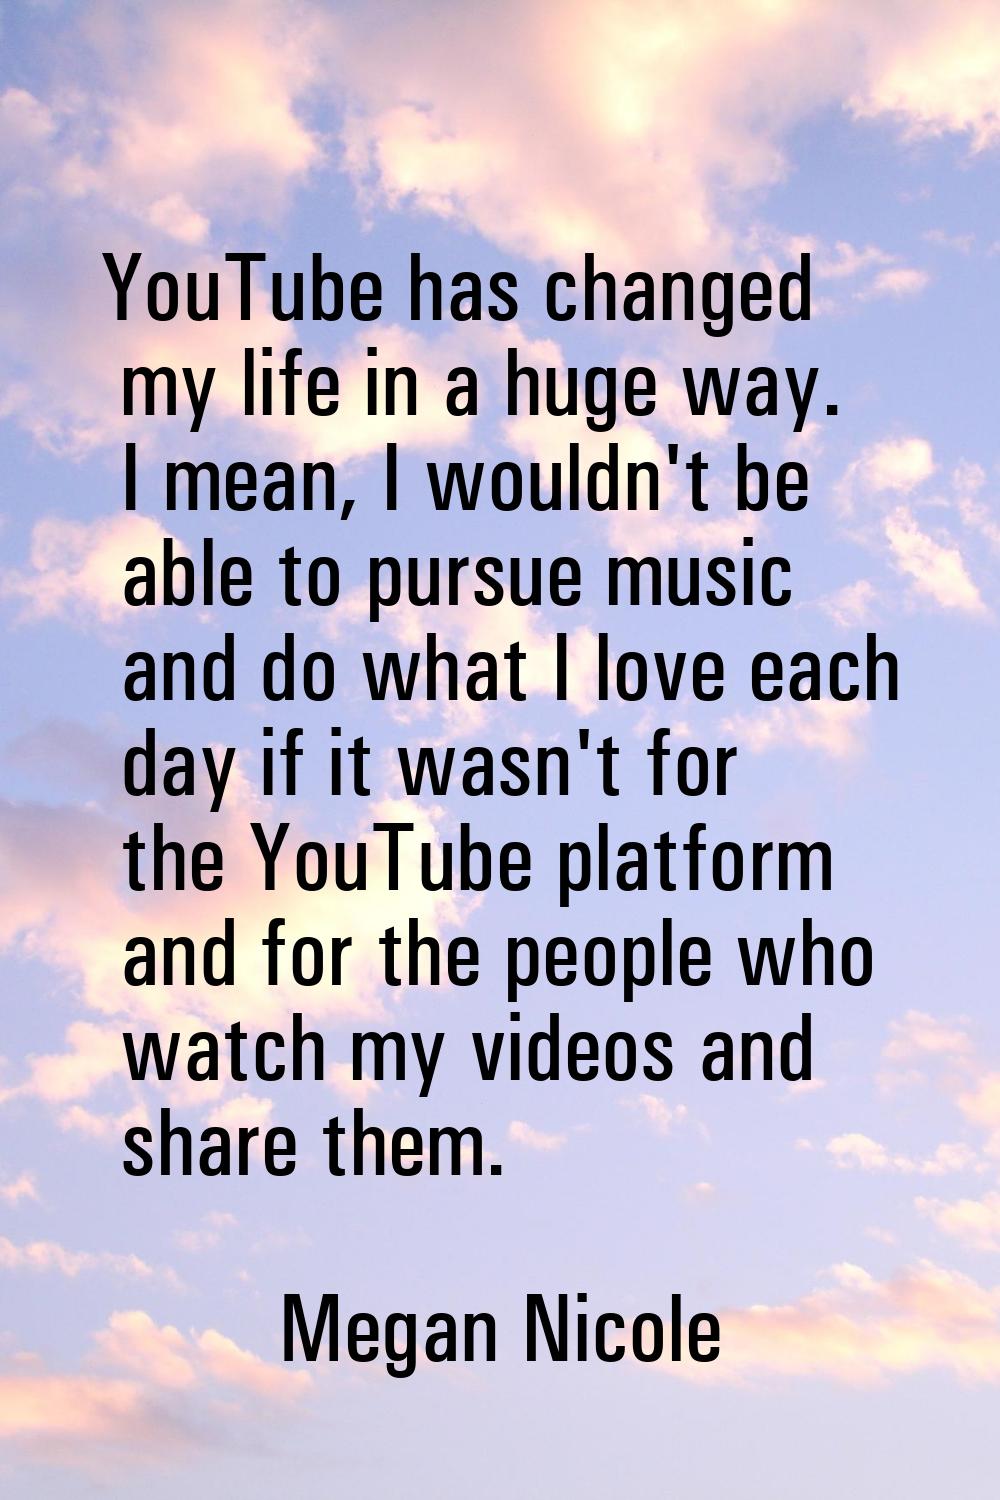 YouTube has changed my life in a huge way. I mean, I wouldn't be able to pursue music and do what I